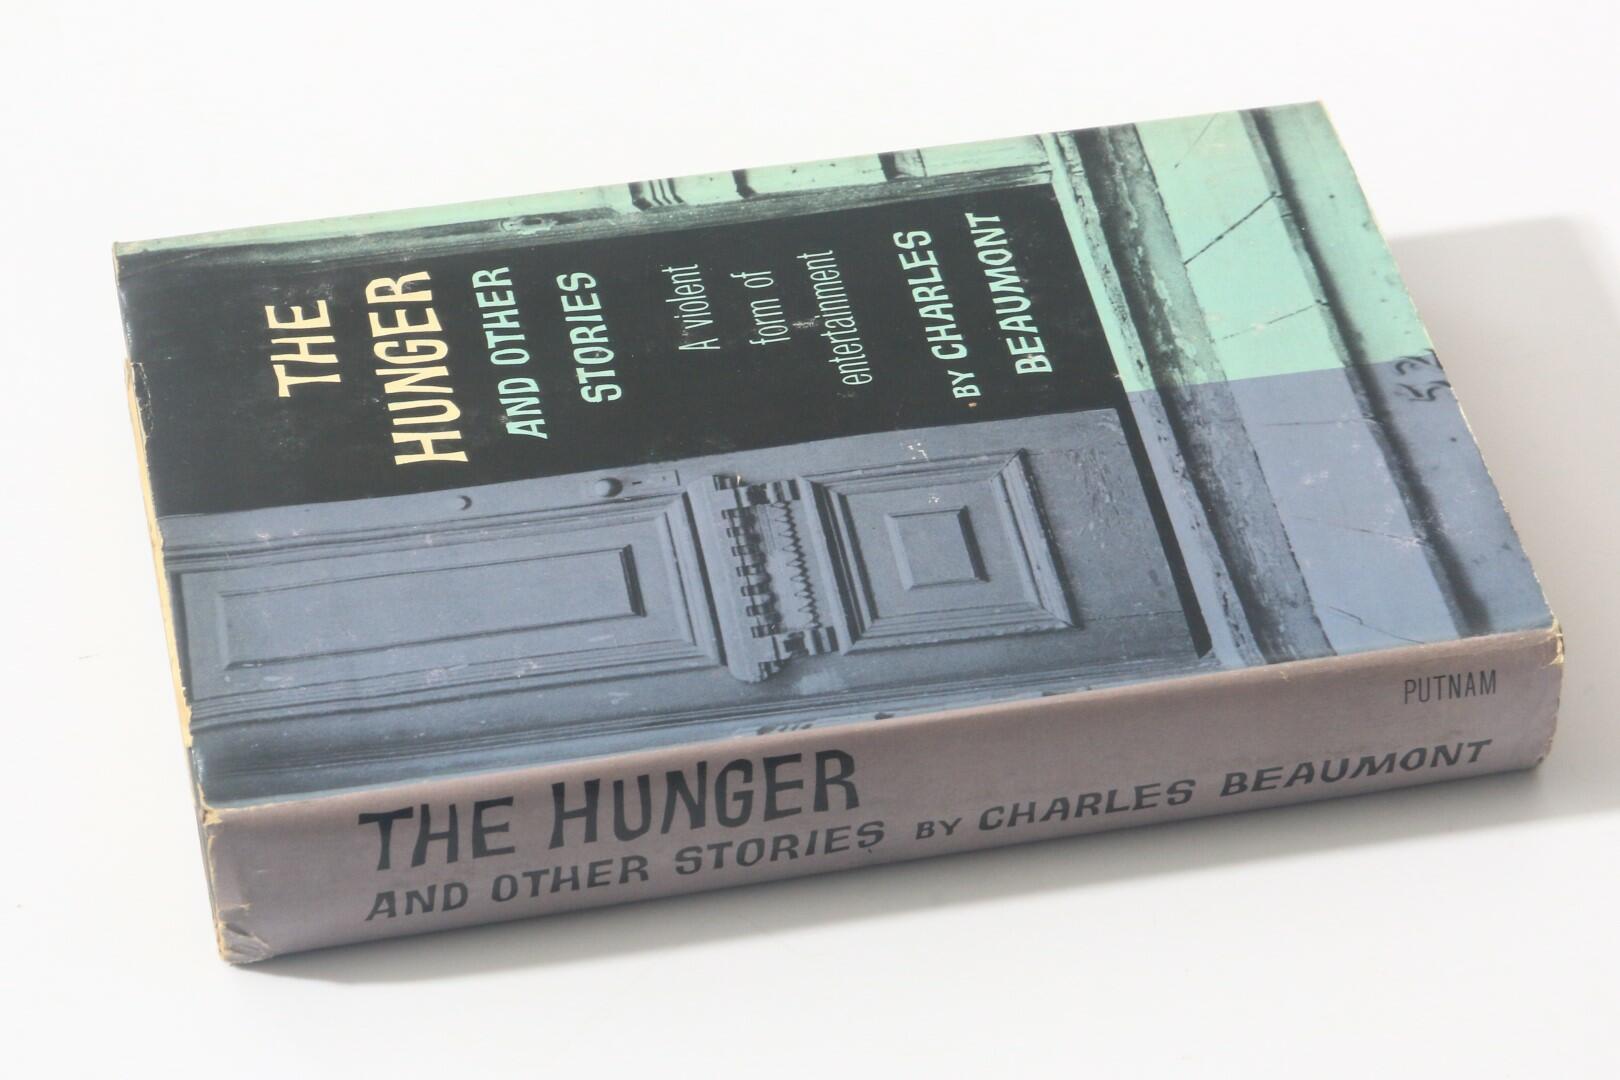 Charles Beaumont - The Hunger and Other Stories - G.P. Putnam, 1957, First Edition.